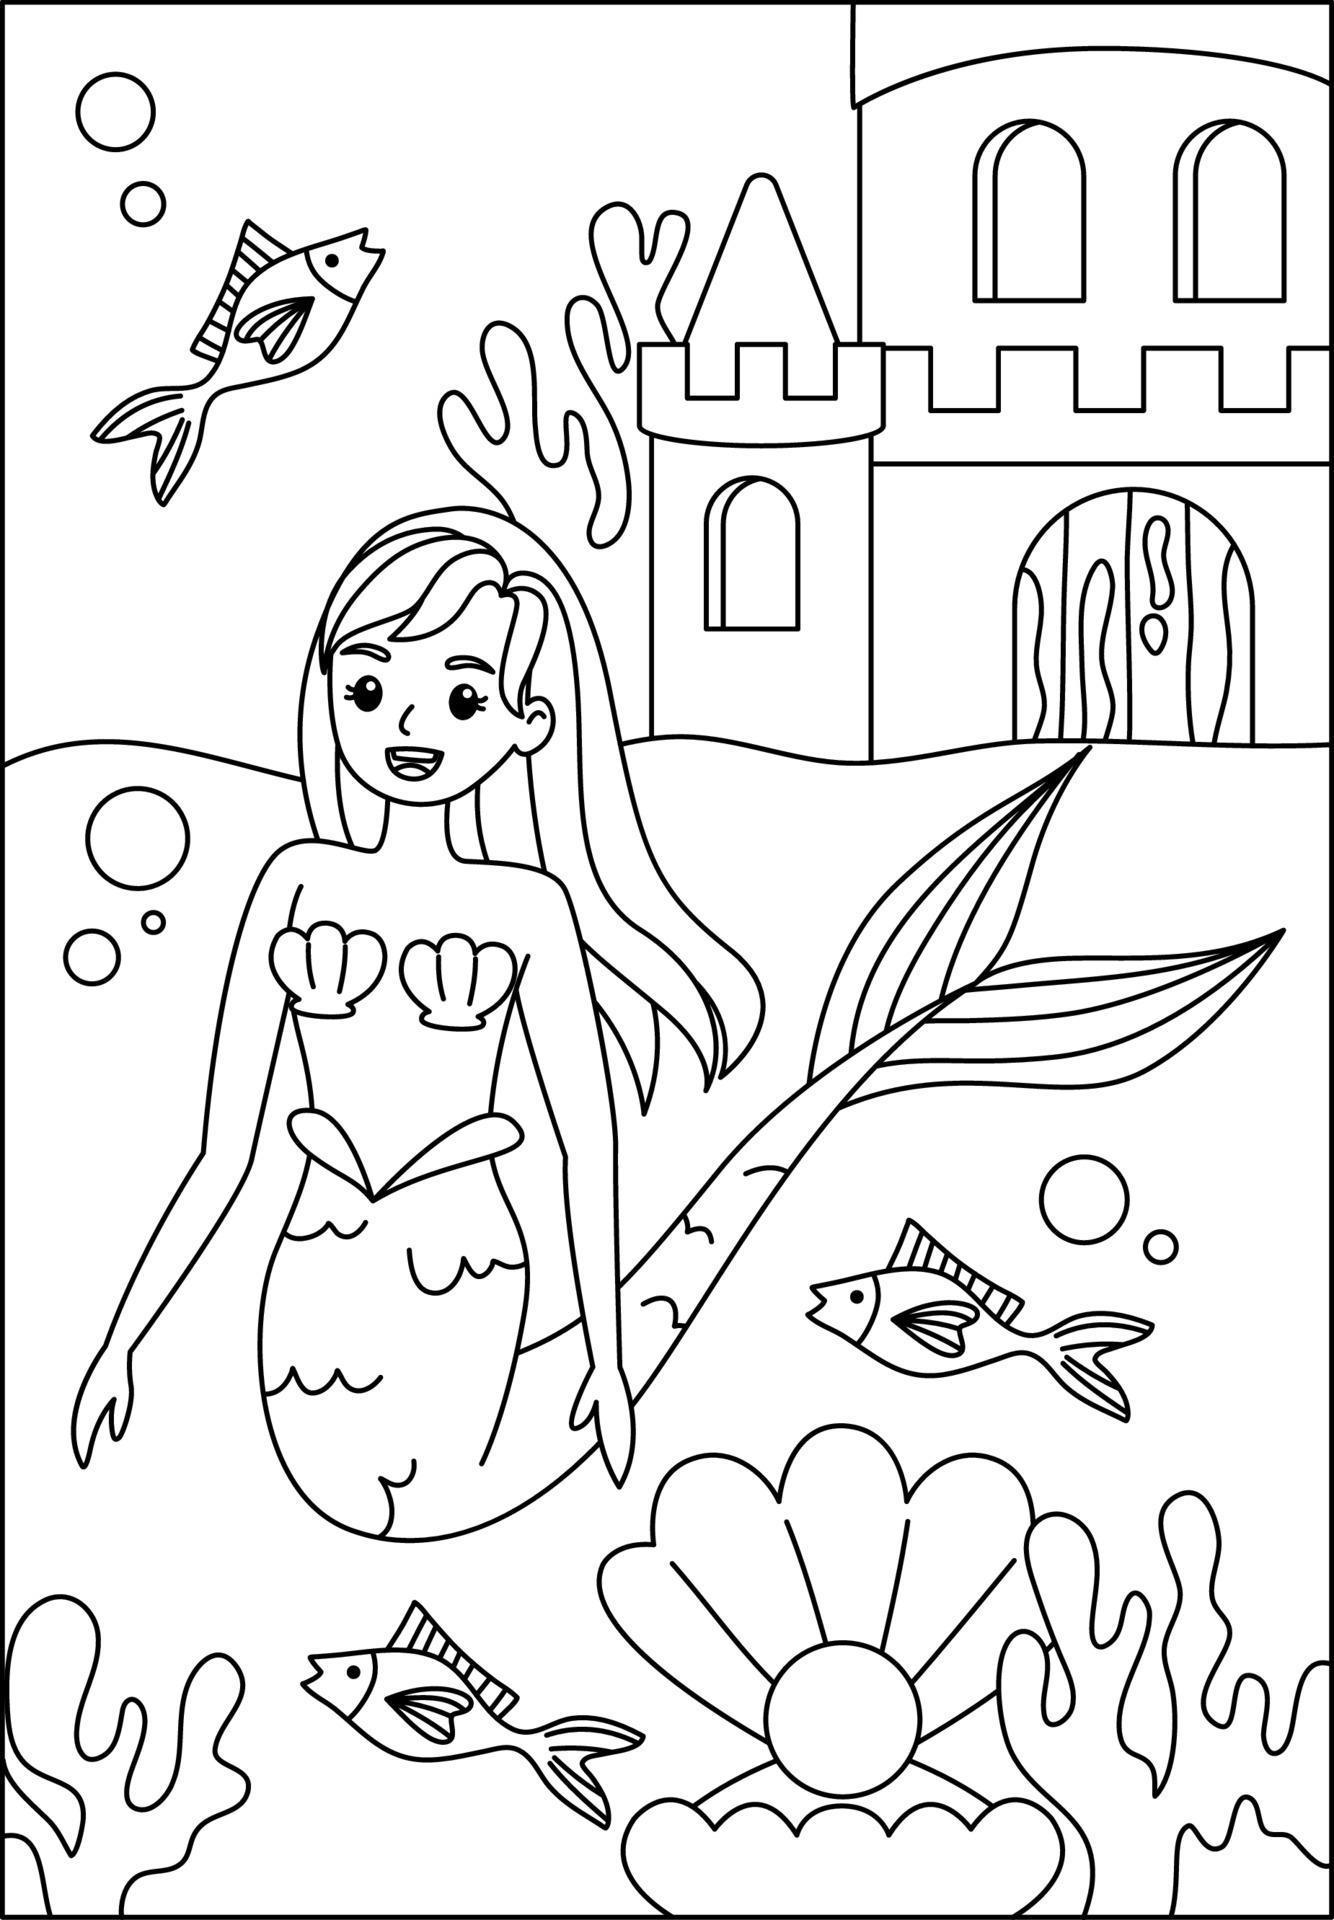 mermaid coloring page for kids 20 Vector Art at Vecteezy